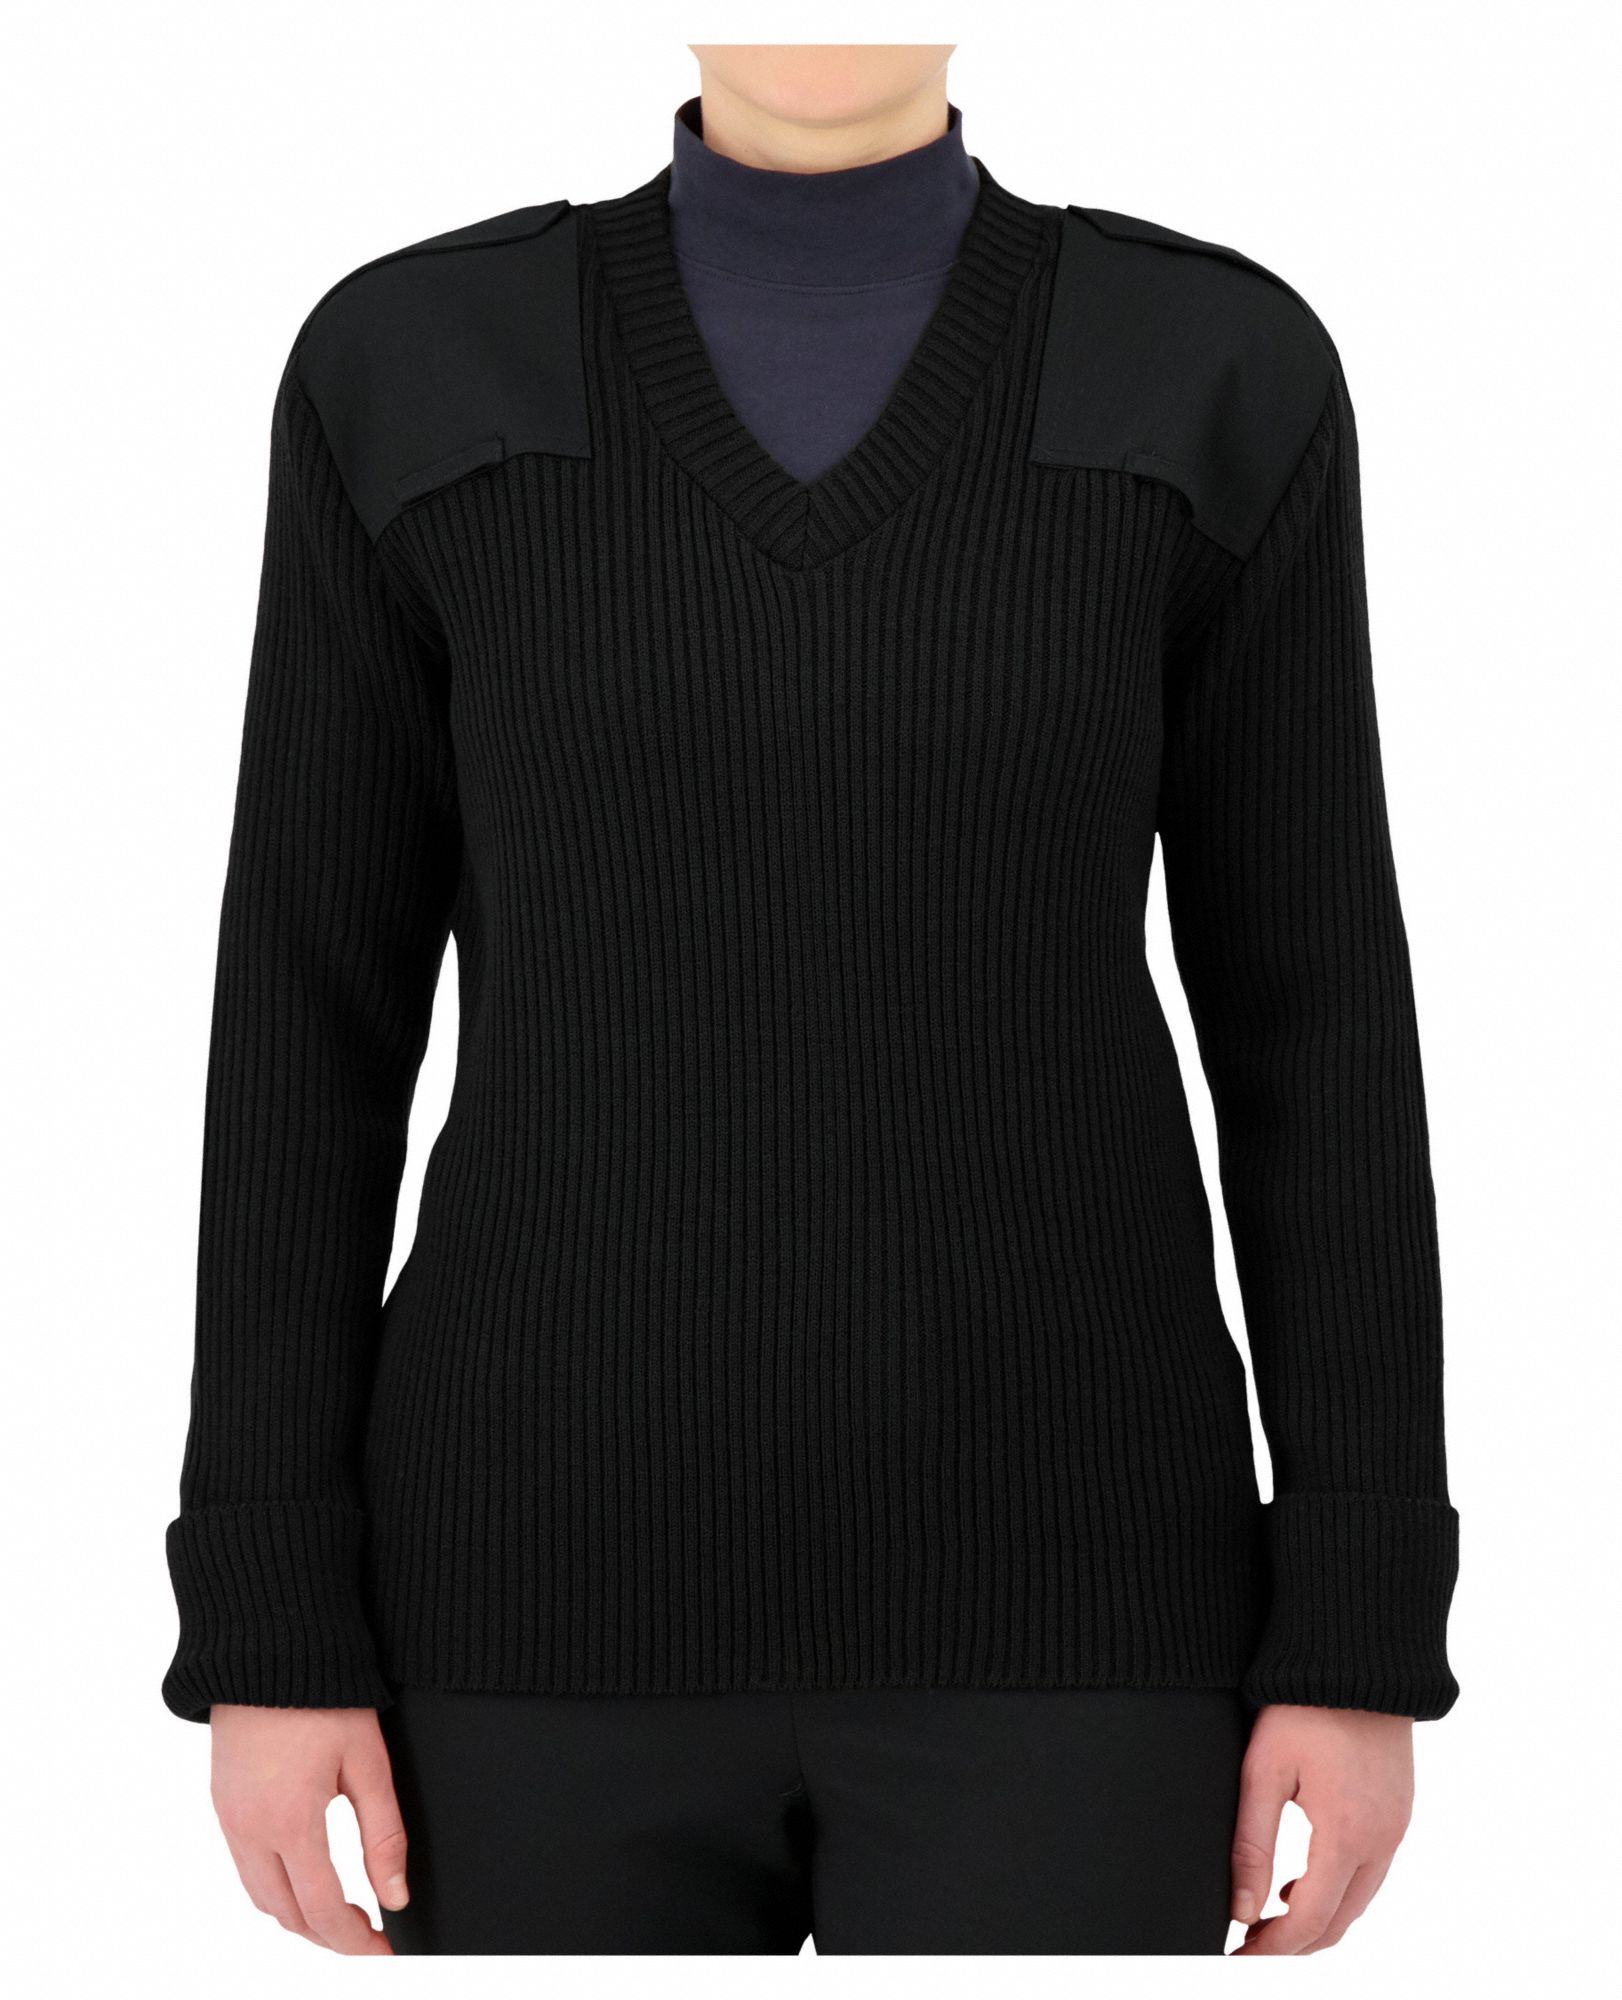 V-Neck Military Sweater: 2XL, 52 in Fits Chest Size, Black, 100% Acrylic Material